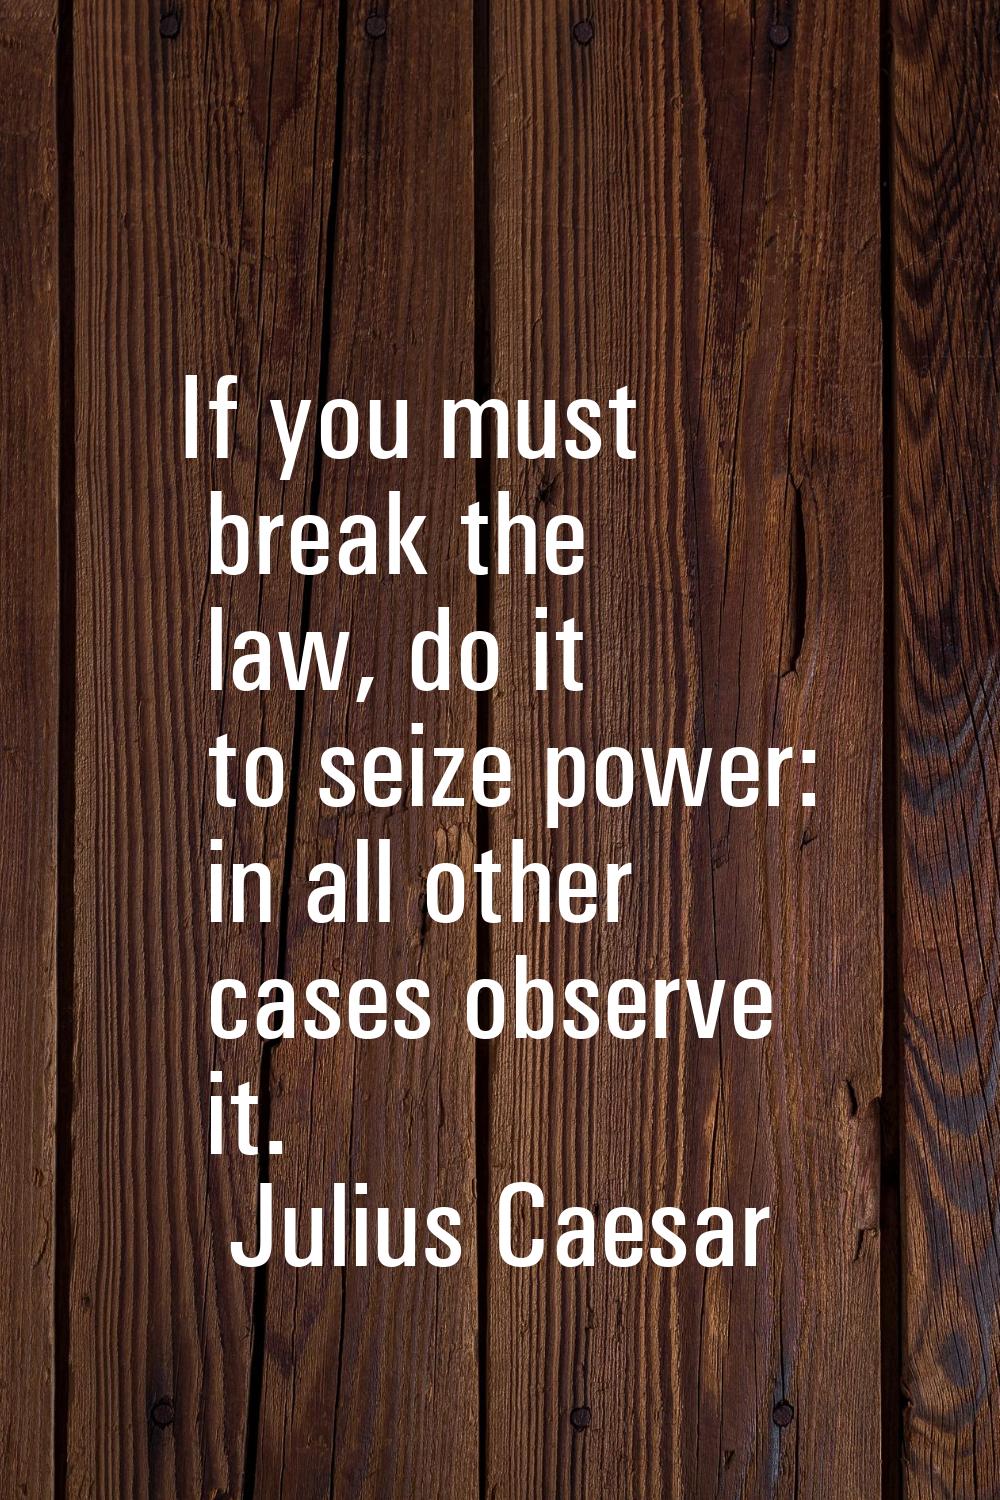 If you must break the law, do it to seize power: in all other cases observe it.